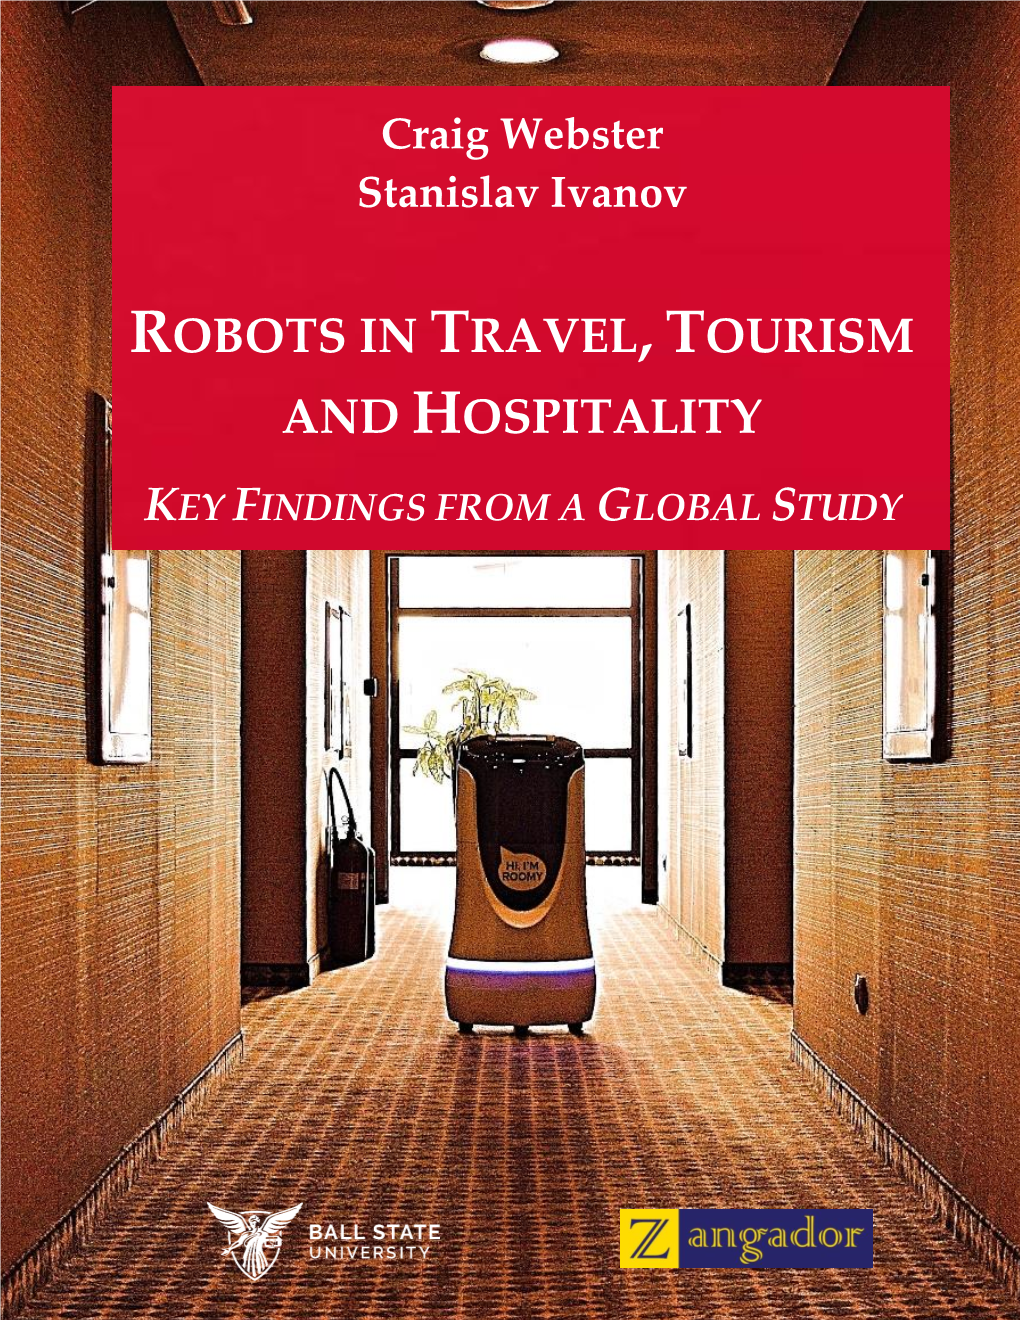 Robots in Travel, Tourism and Hospitality